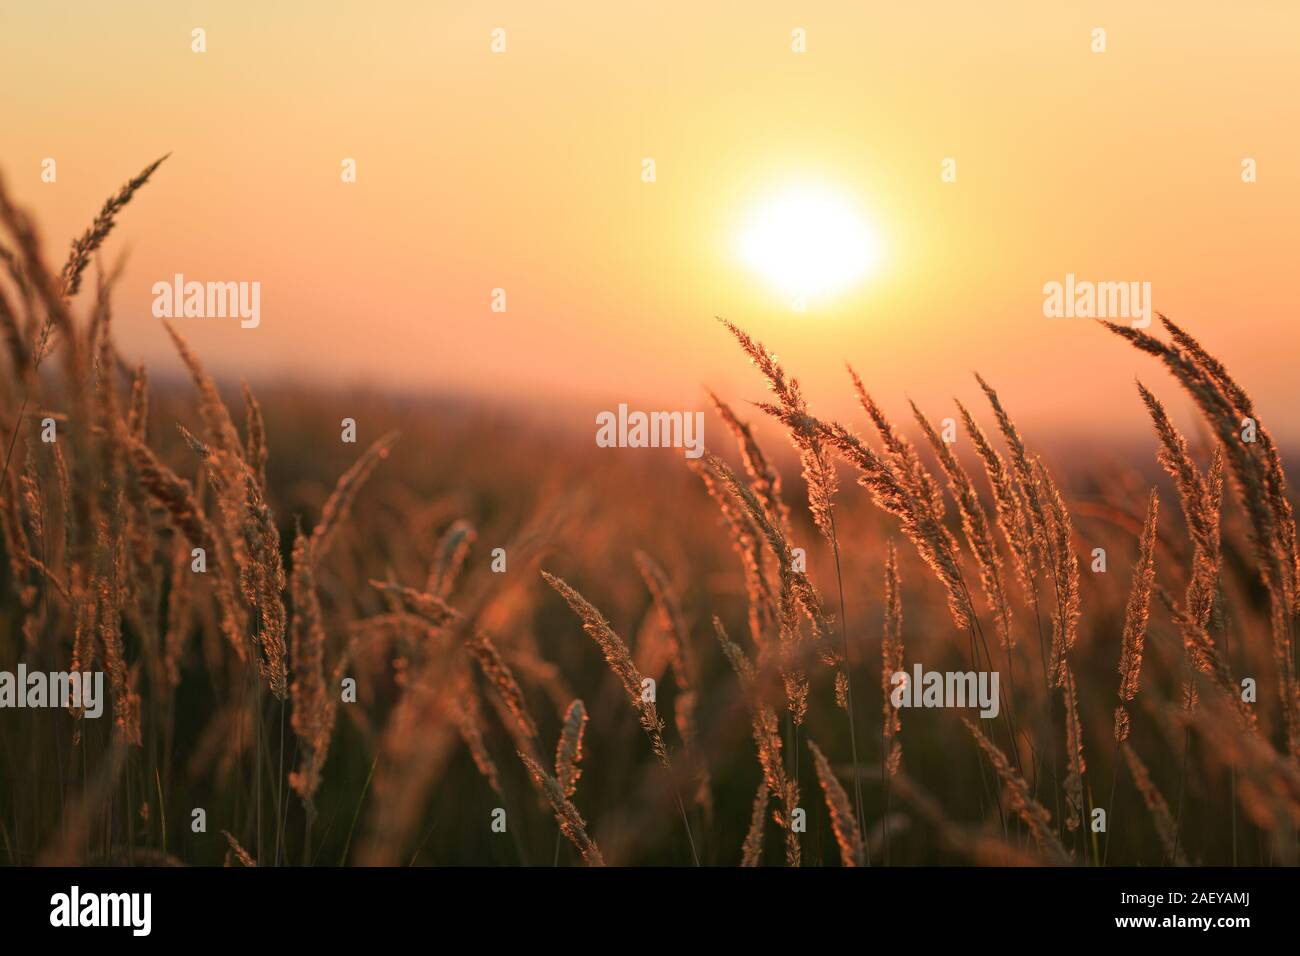 Dried weeds in Backlight. Shallow depth of field. End of Summer Atmosphere. Sunset. Stock Photo